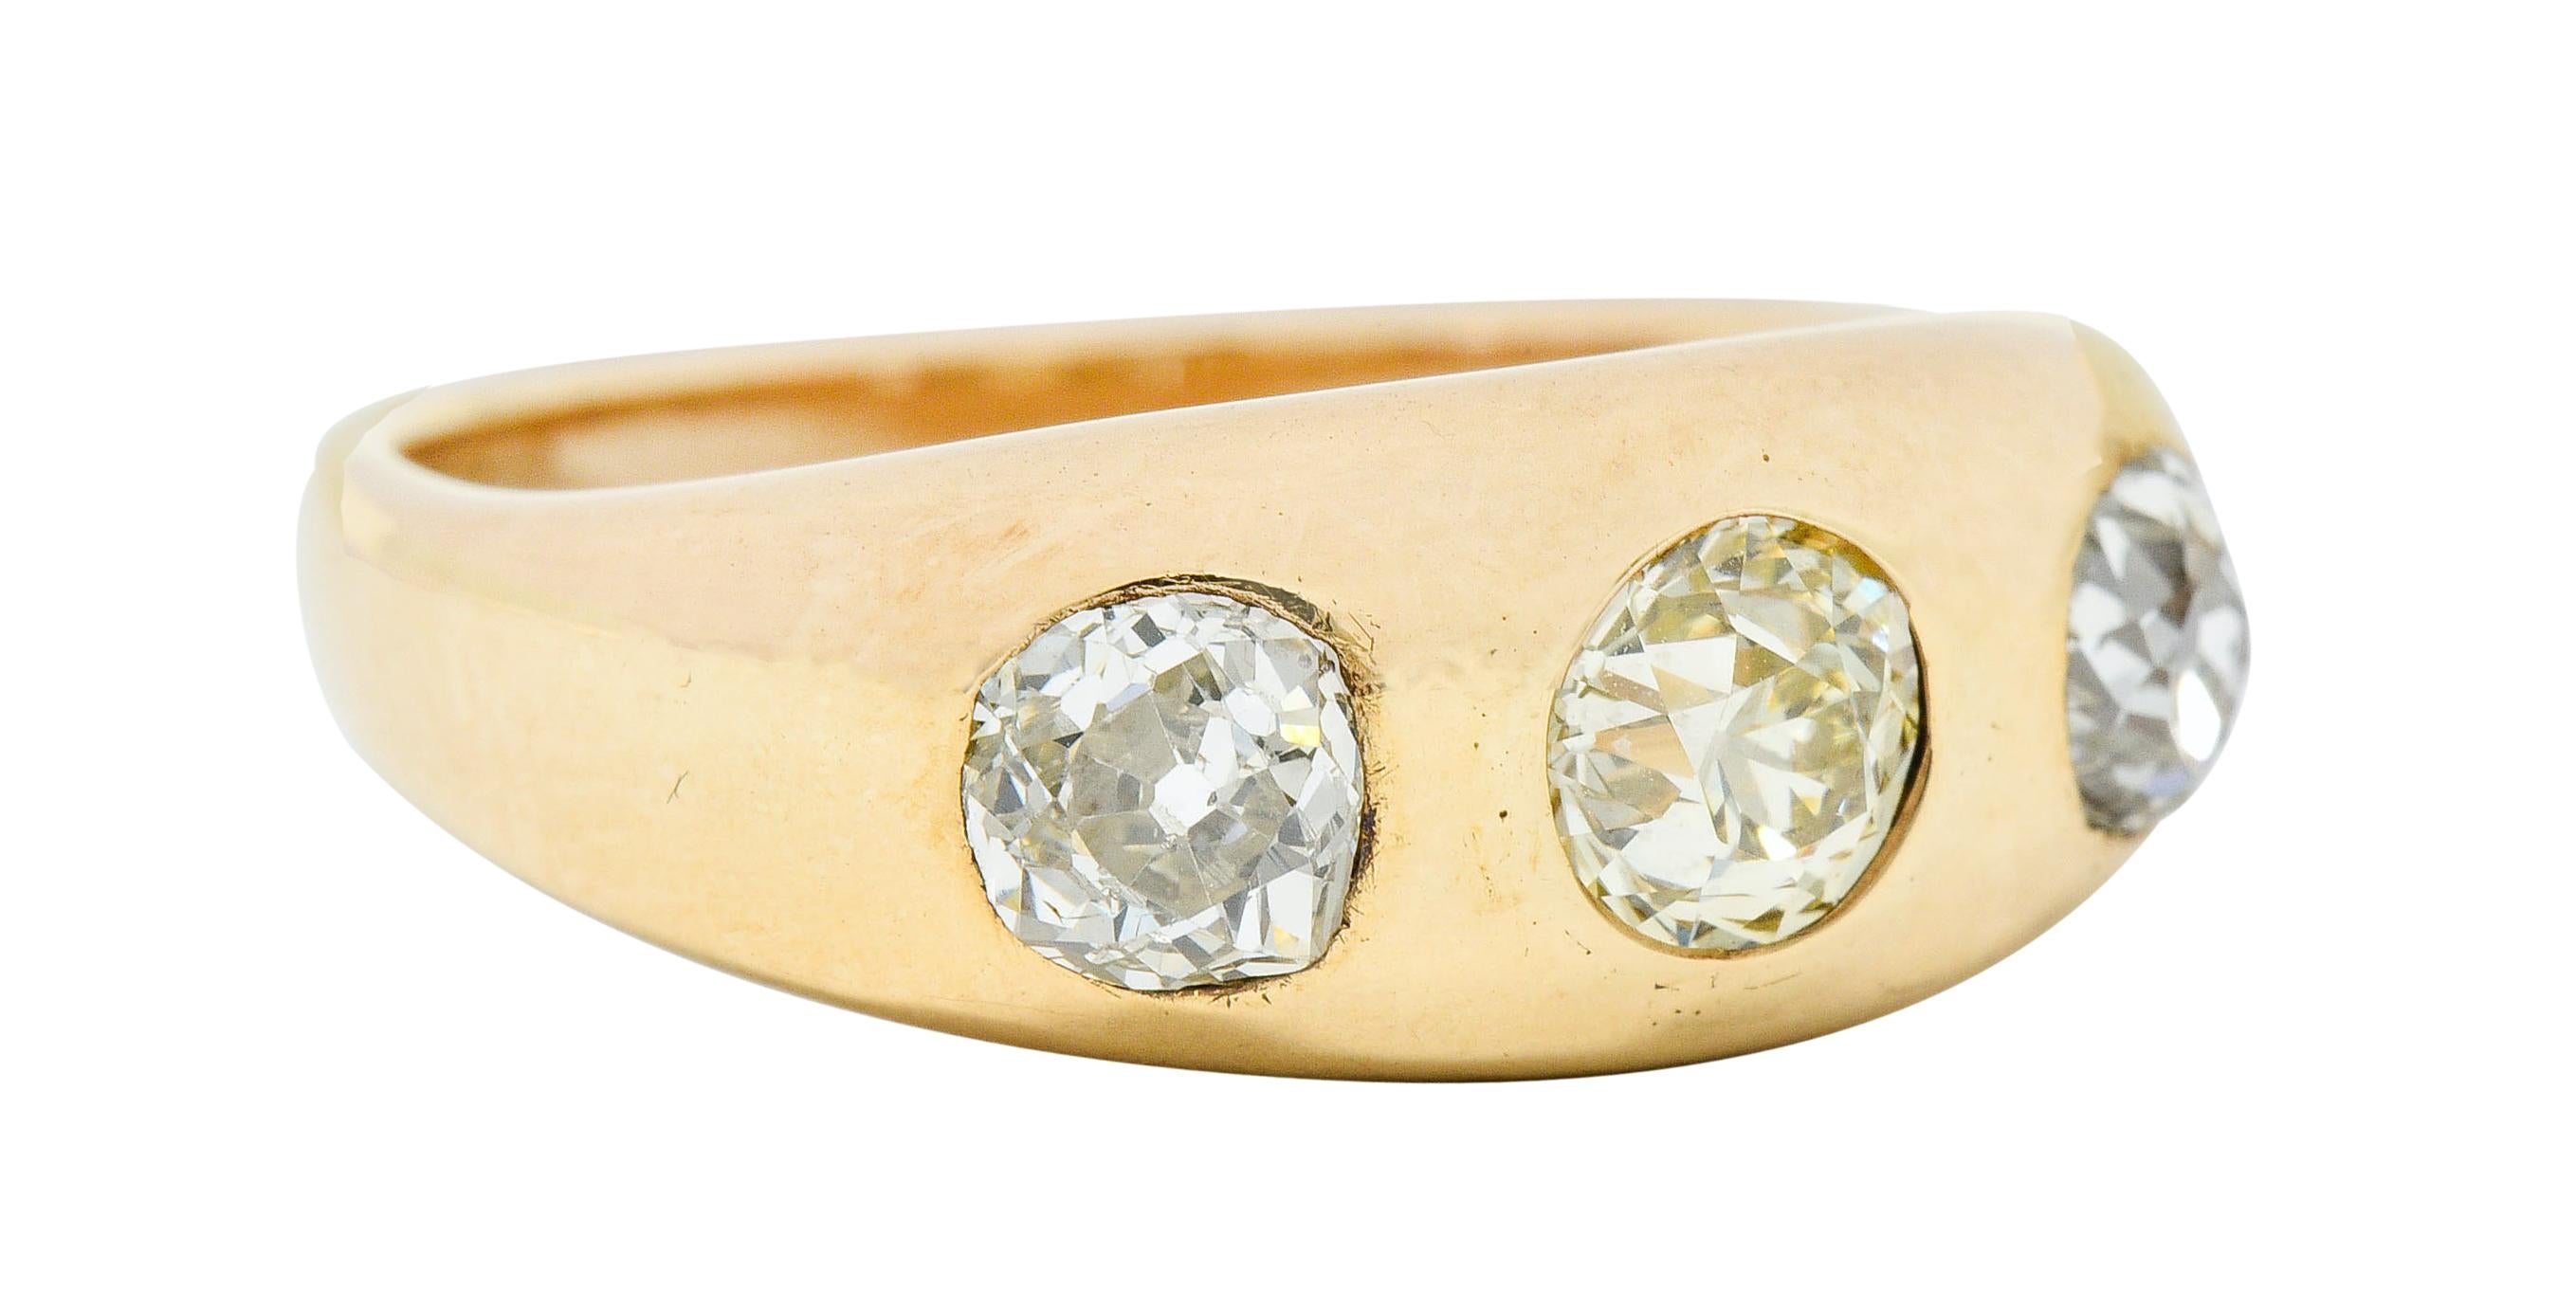 Gypsy style band ring with three old European cut diamonds

Centering an old European cut diamond that weighs approximately 0.56 carat with light yellow color and VS clarity

Flanked by two old mine cut diamonds weighing in total approximately 0.70